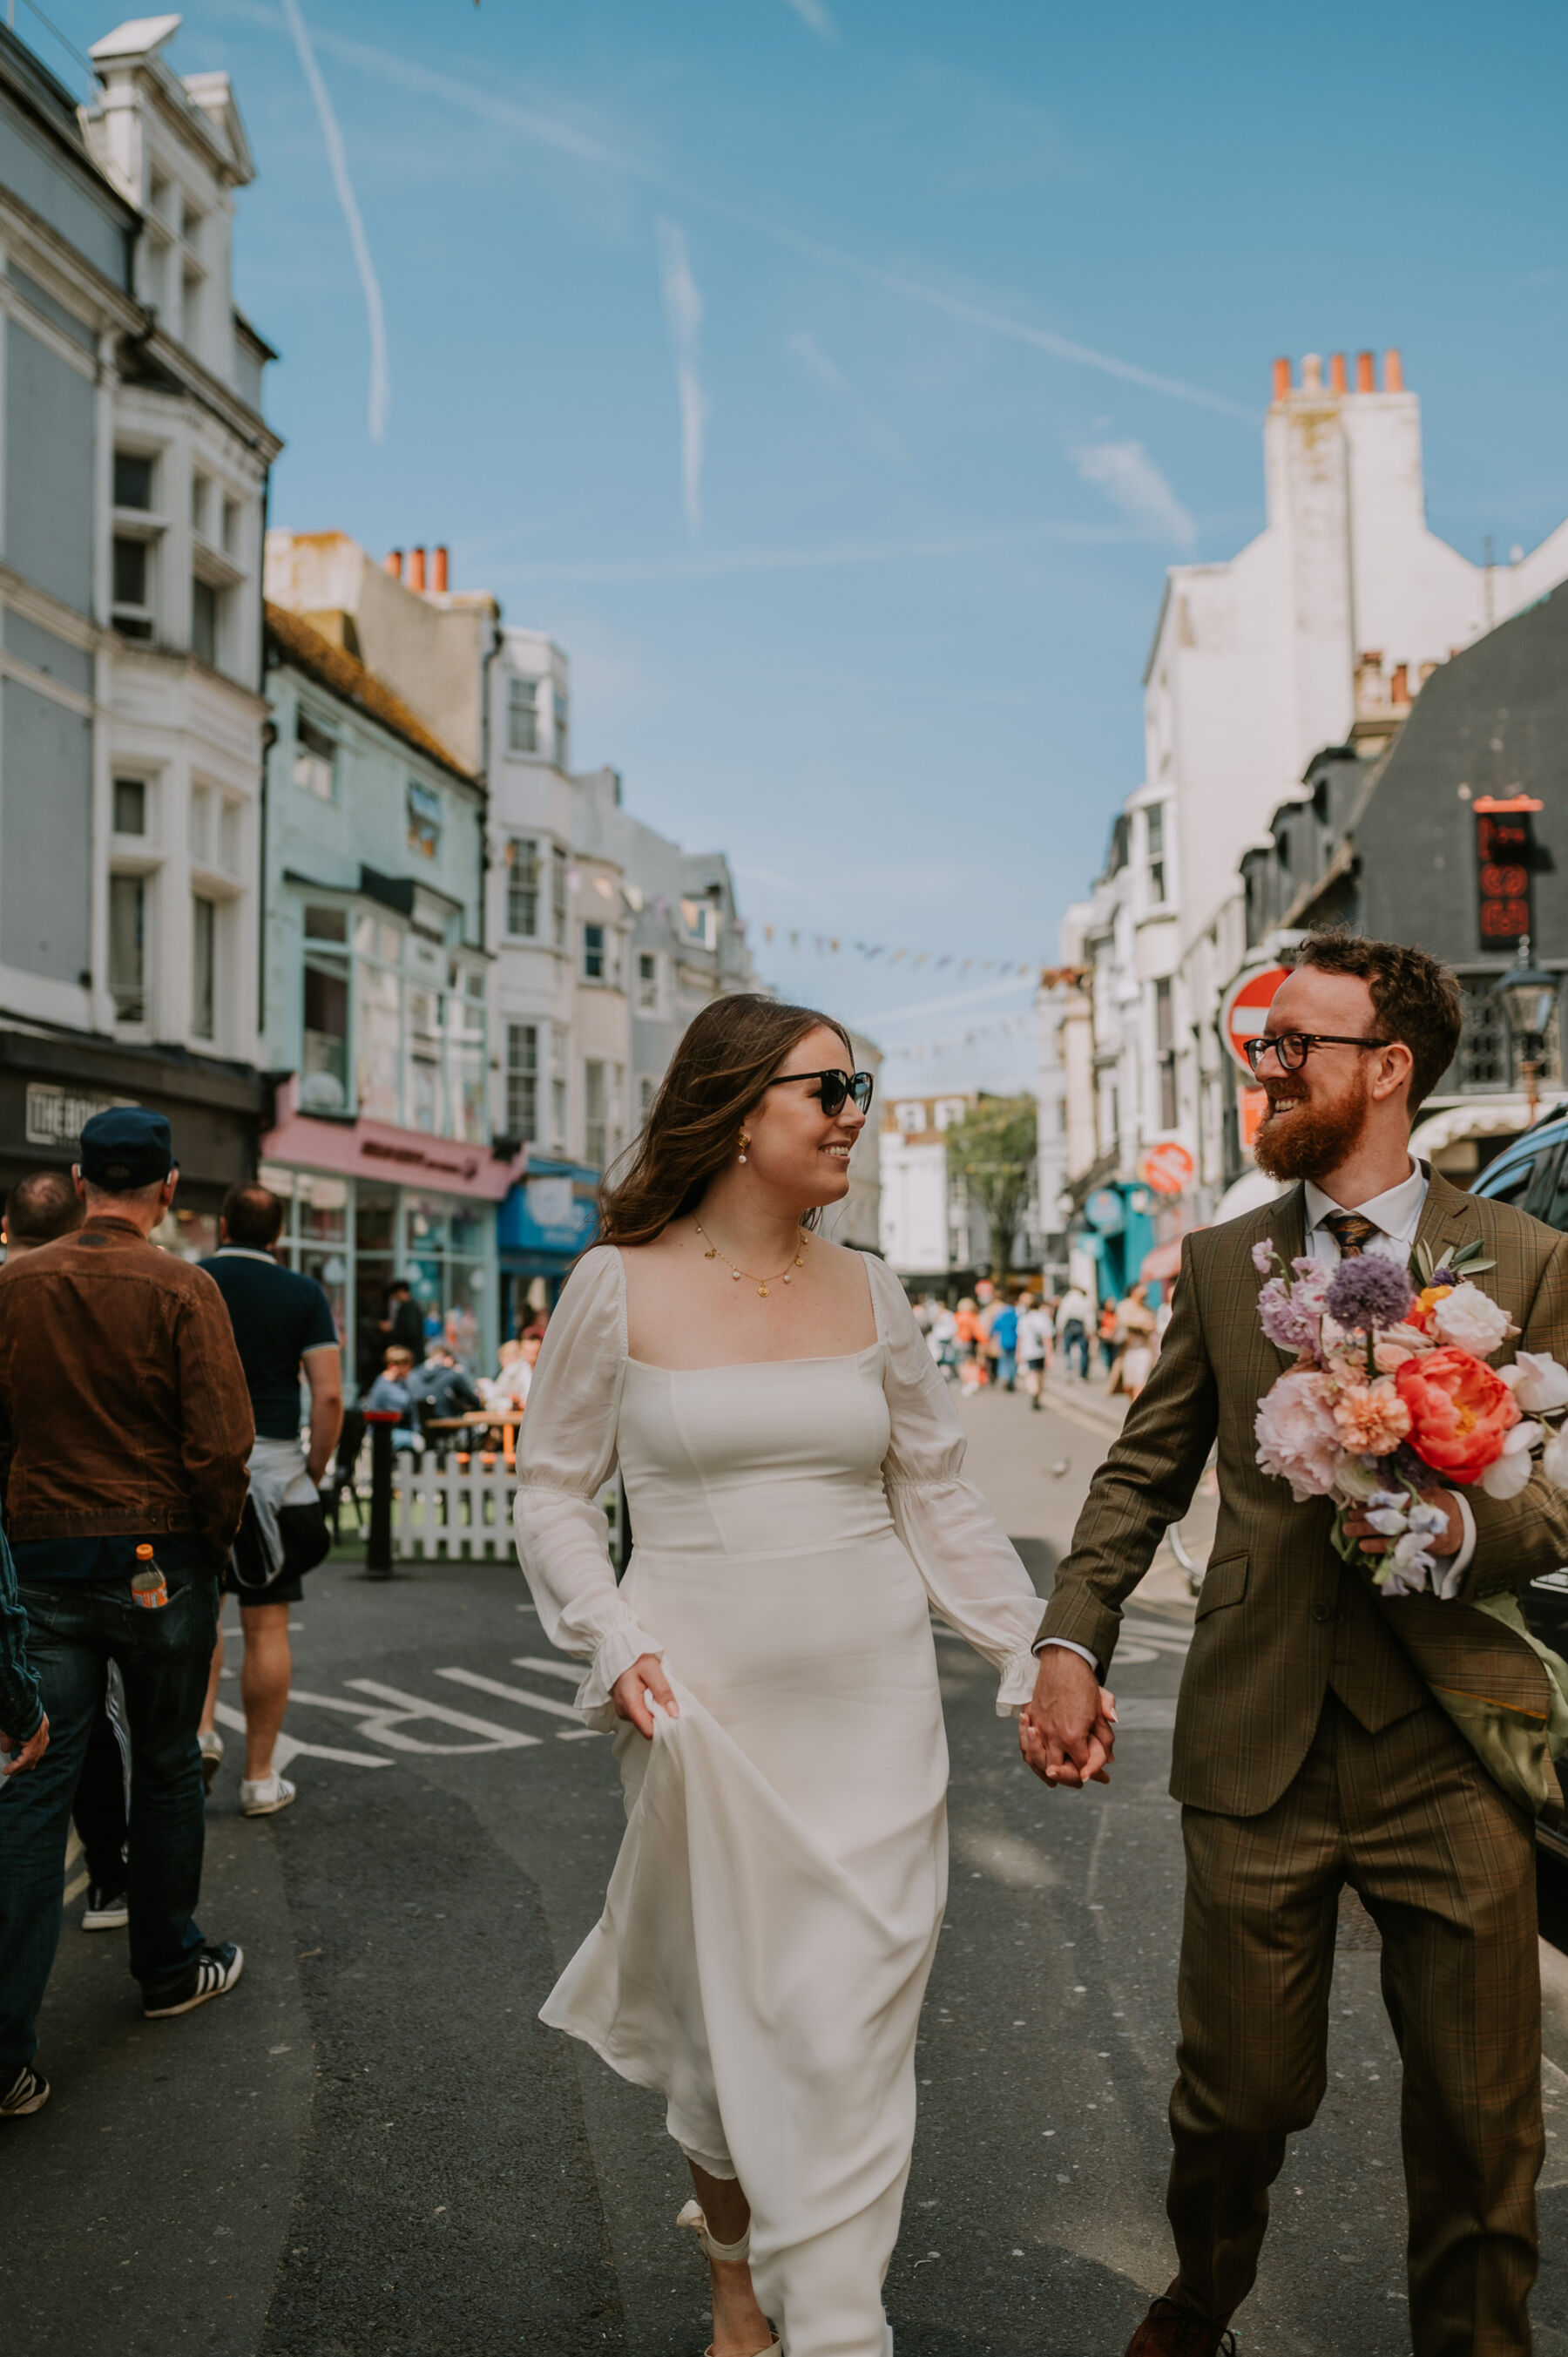 Bride and groom walking through Brighton. Bride wears a Reformation dress. Groom carrying the bride's colourful bouquet.